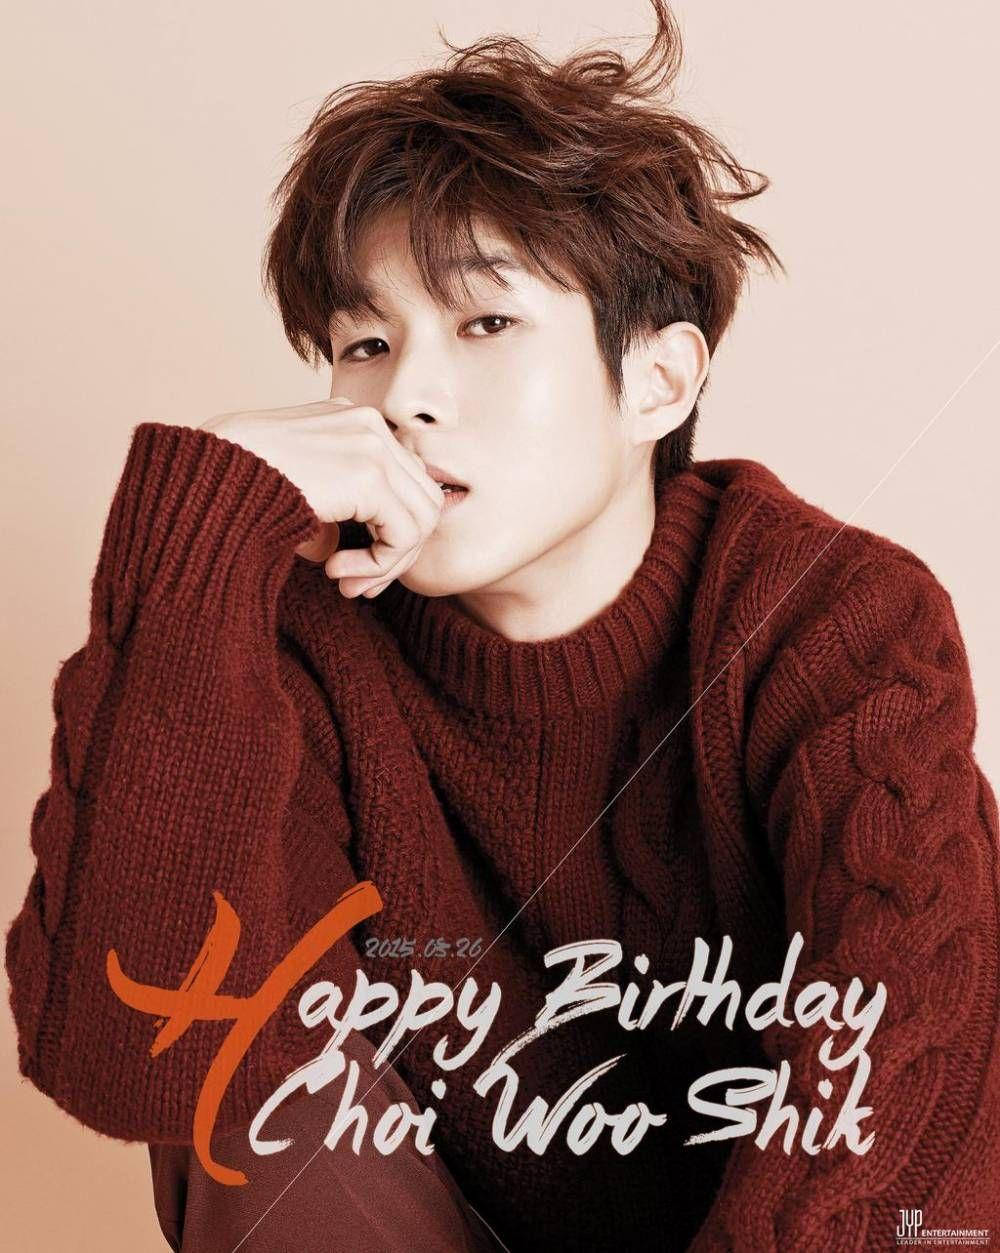 Choi Woo Shik Celebrating Birthday With A Cheerful Smile Background